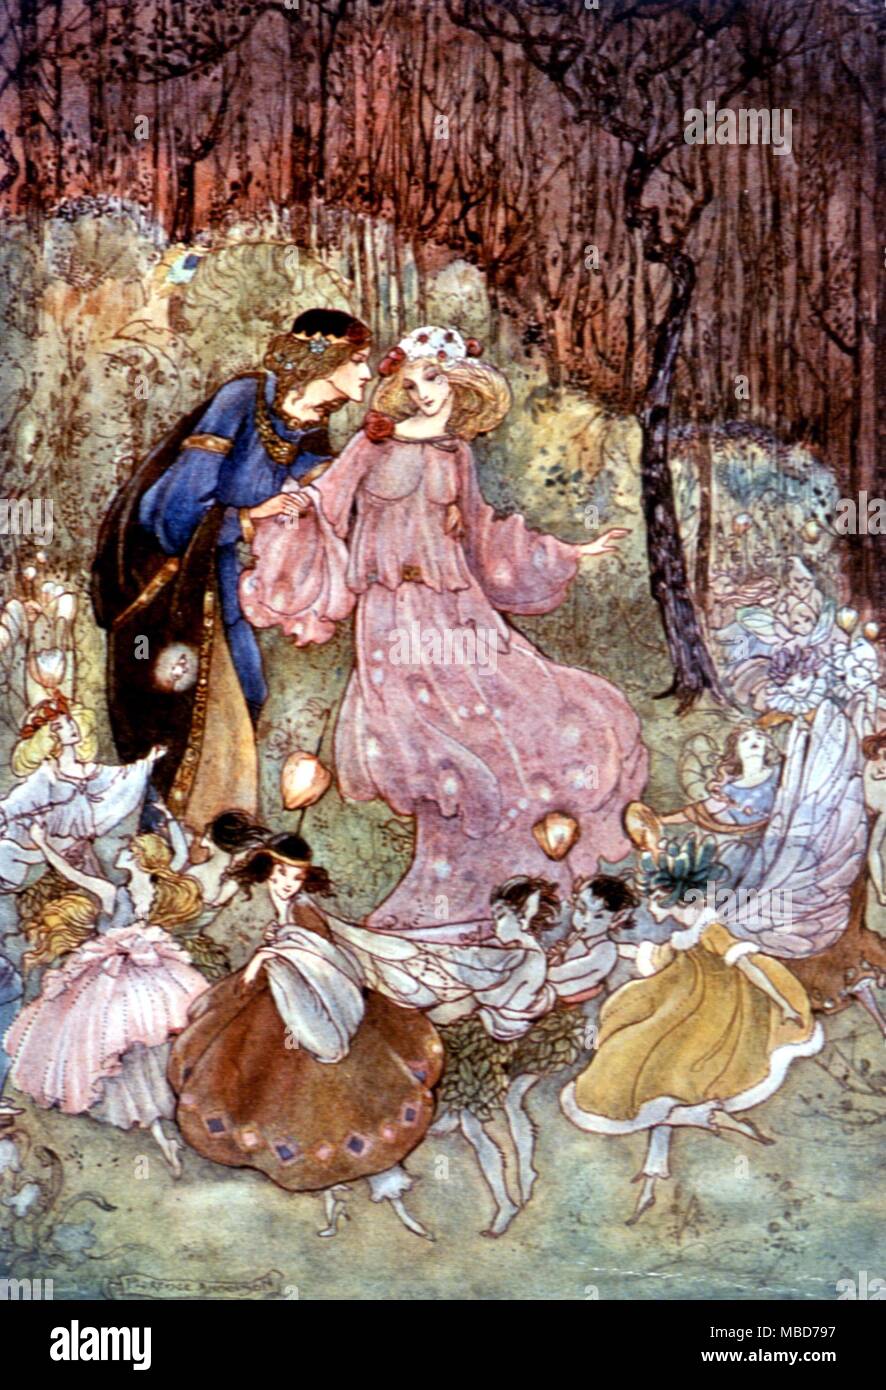 Fairies with the Prince and the Maid - illustration by Florence Anderson for Fiona Malcom's story Joy - from My Fairyland, A Child's Own Vision 1917 Stock Photo